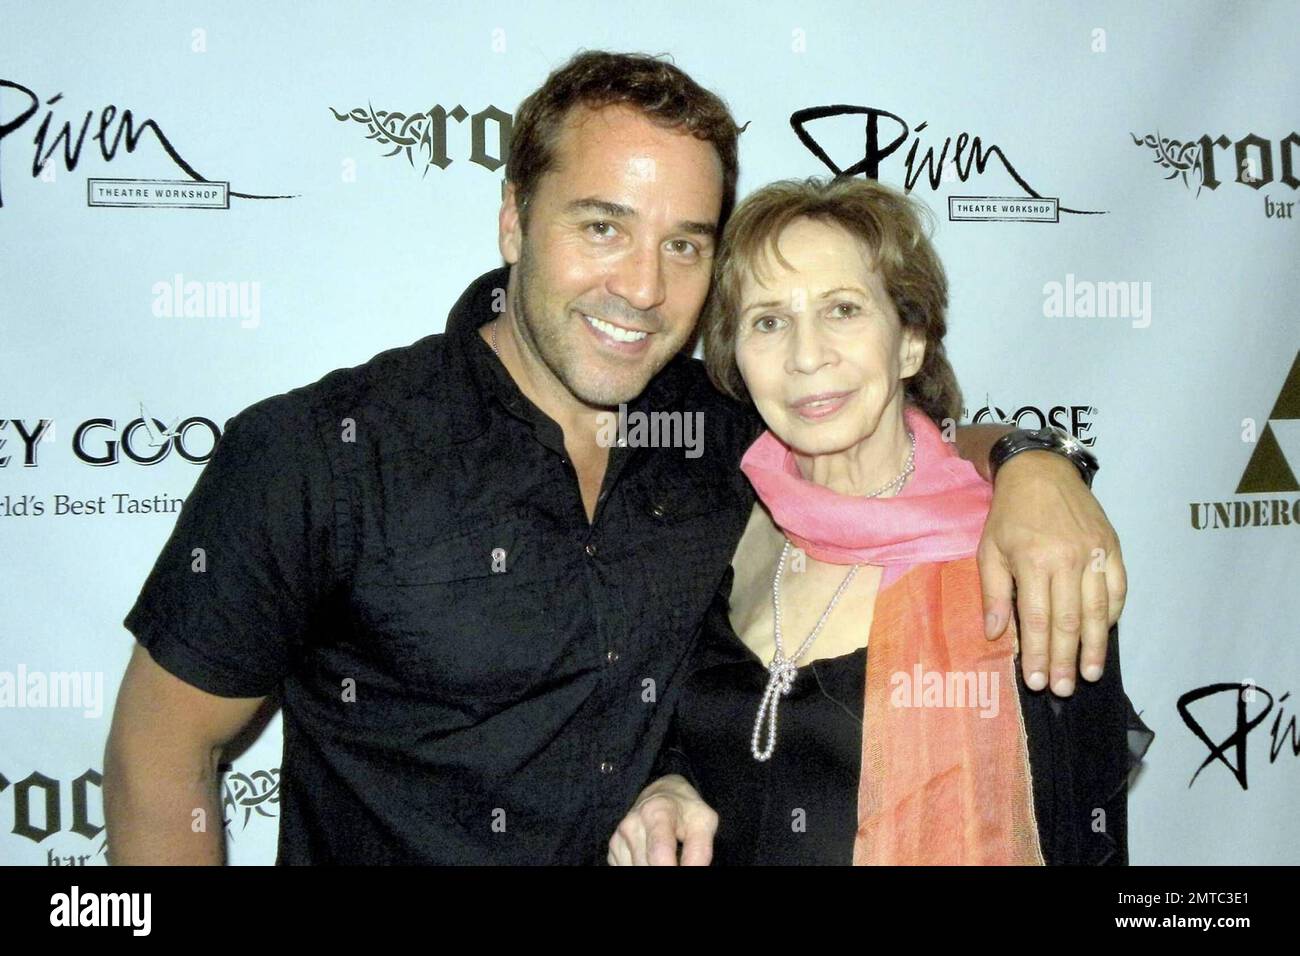 Actor Jeremy Piven, his mother Joyce Piven and Rockit Bar and Grill owner Billy Dec are among the attendees at a live auction benefiting the Piven Theatre Workshop, founded by Piven's parents, Joyce and Byrne, over 30 years ago. The event raised an estimated $115,000 which will provide scholarships for patrons to attend the theatre company's training center for children and adults. Famous alumni include Jeremy Piven, John Cusack, Joan Cusack, Aidan Quinn, Lili Taylor, and Kate Walsh. Among the auction items was a chance to appear on Jeremy's HBO show 'Entourage.' Chicago, IL. 6/21/09. . Stock Photo